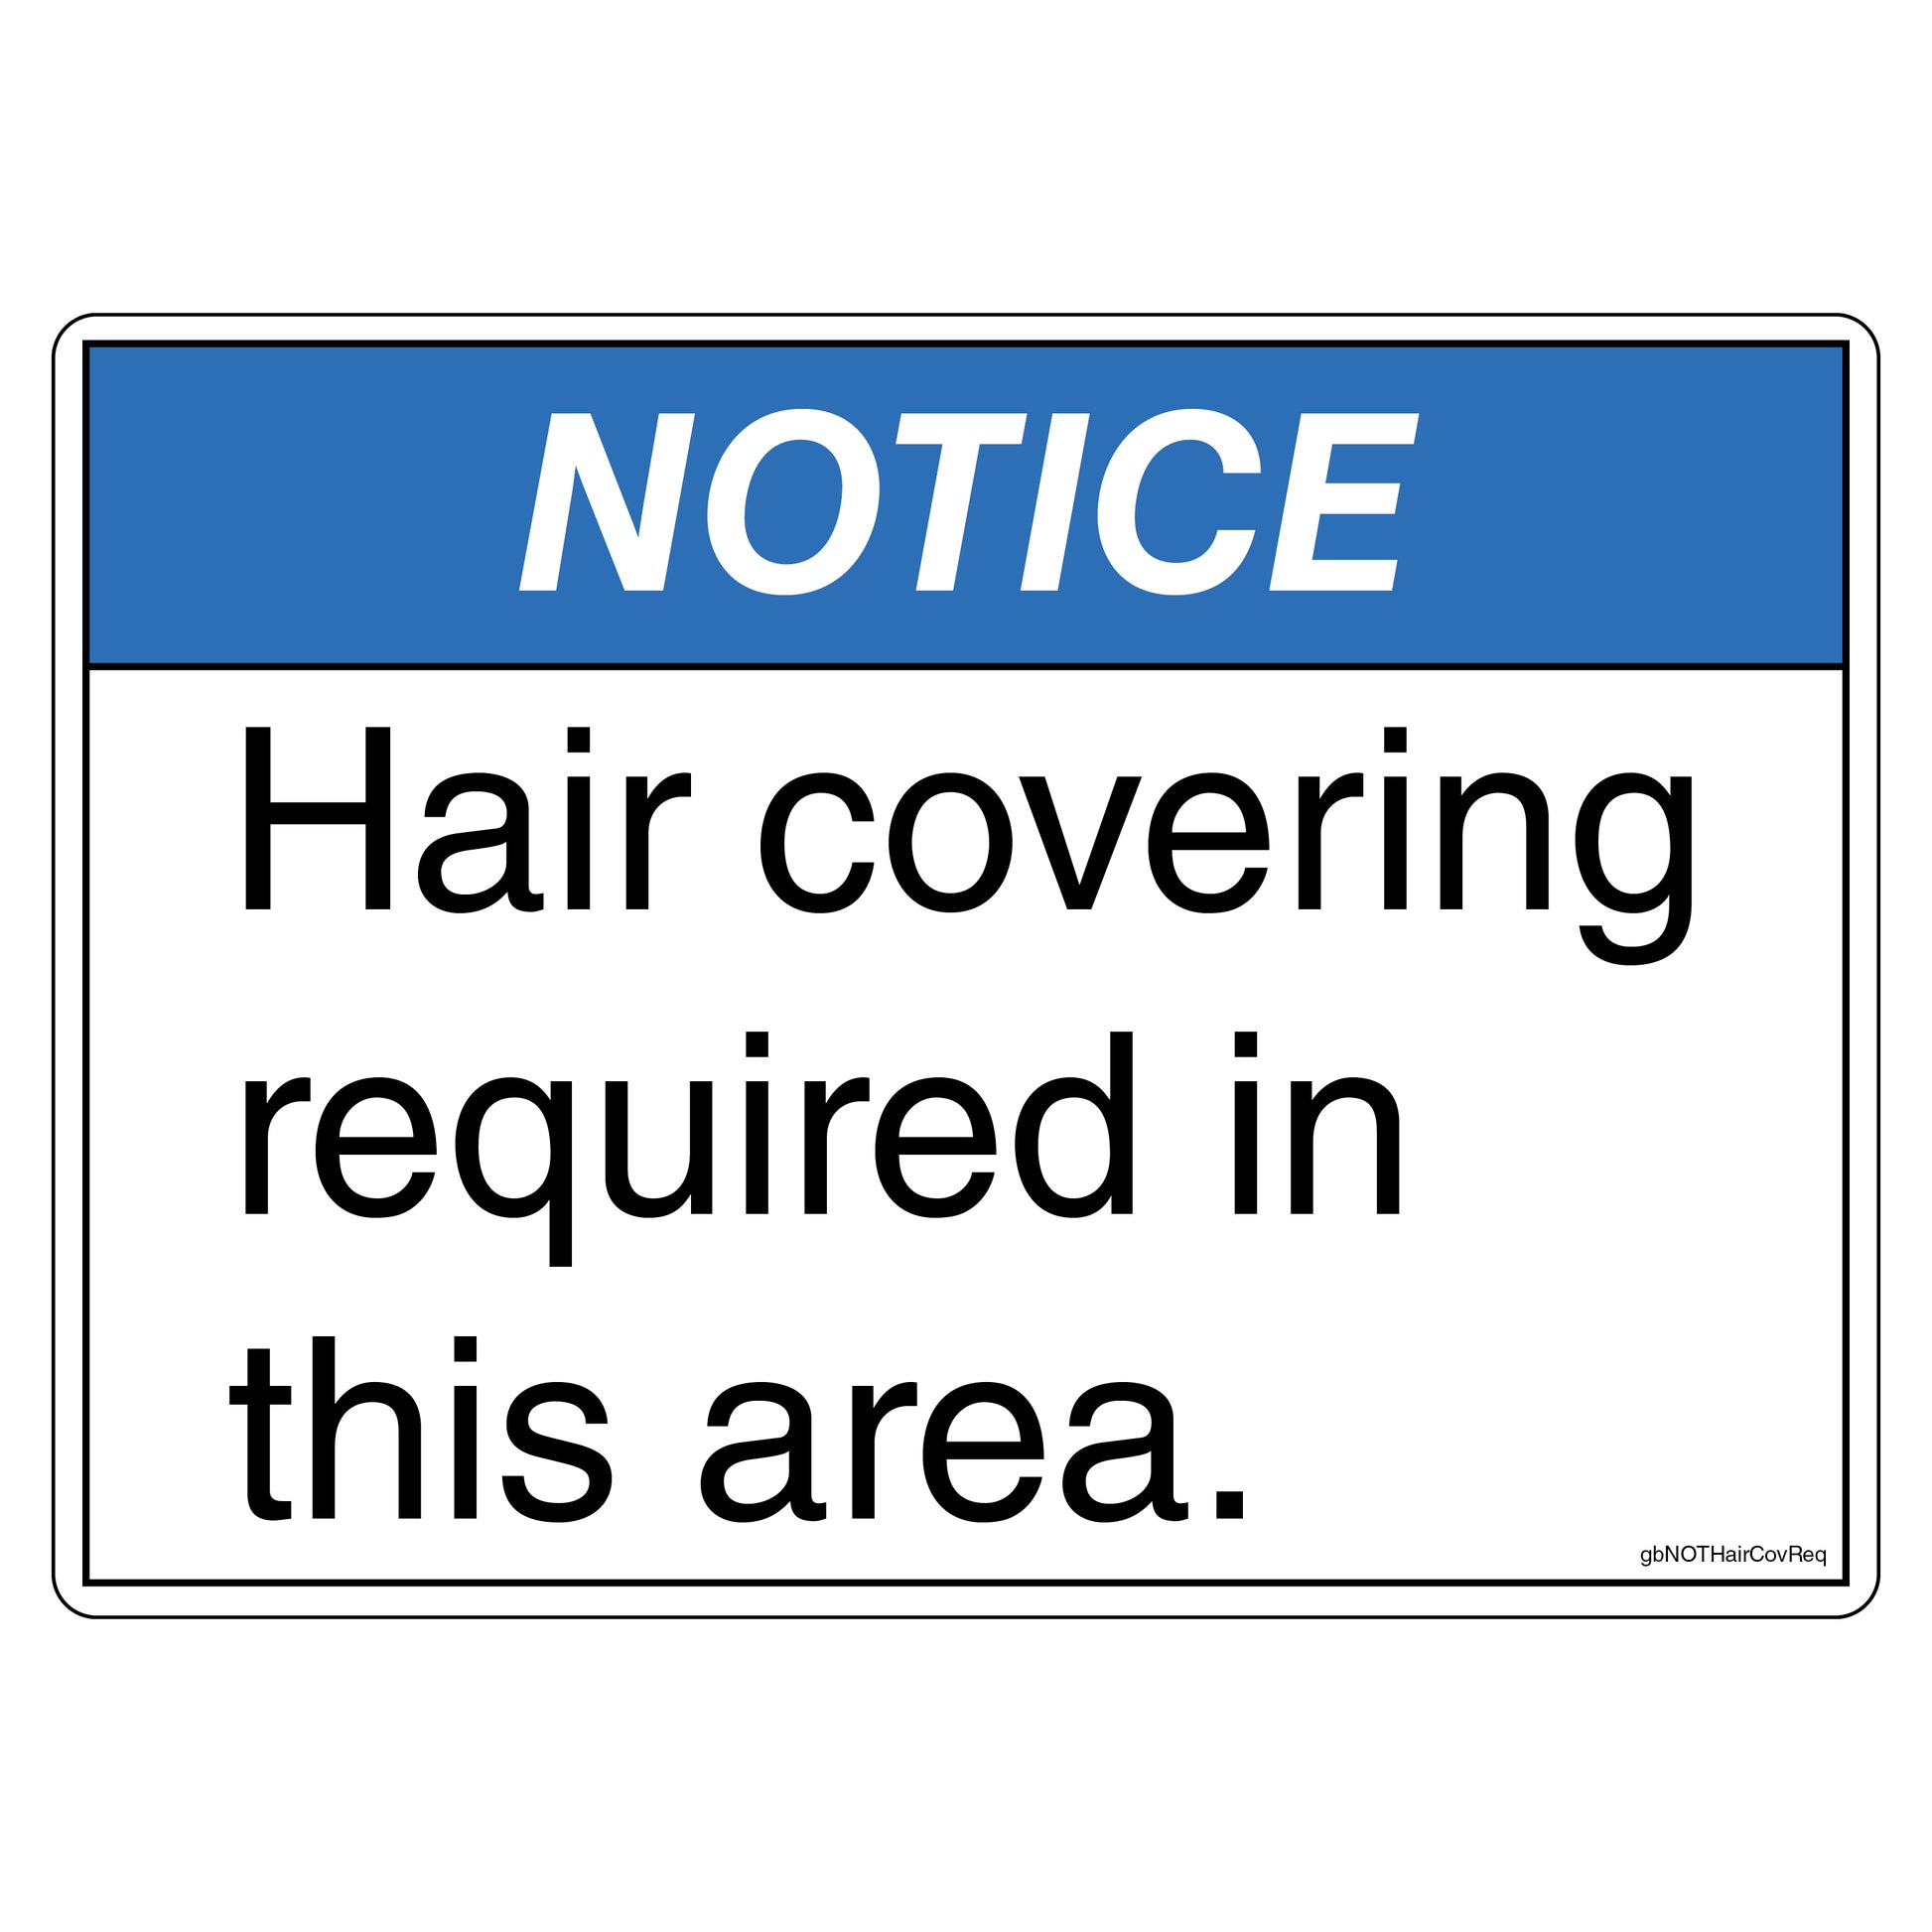 Notice: hair covering required in this area